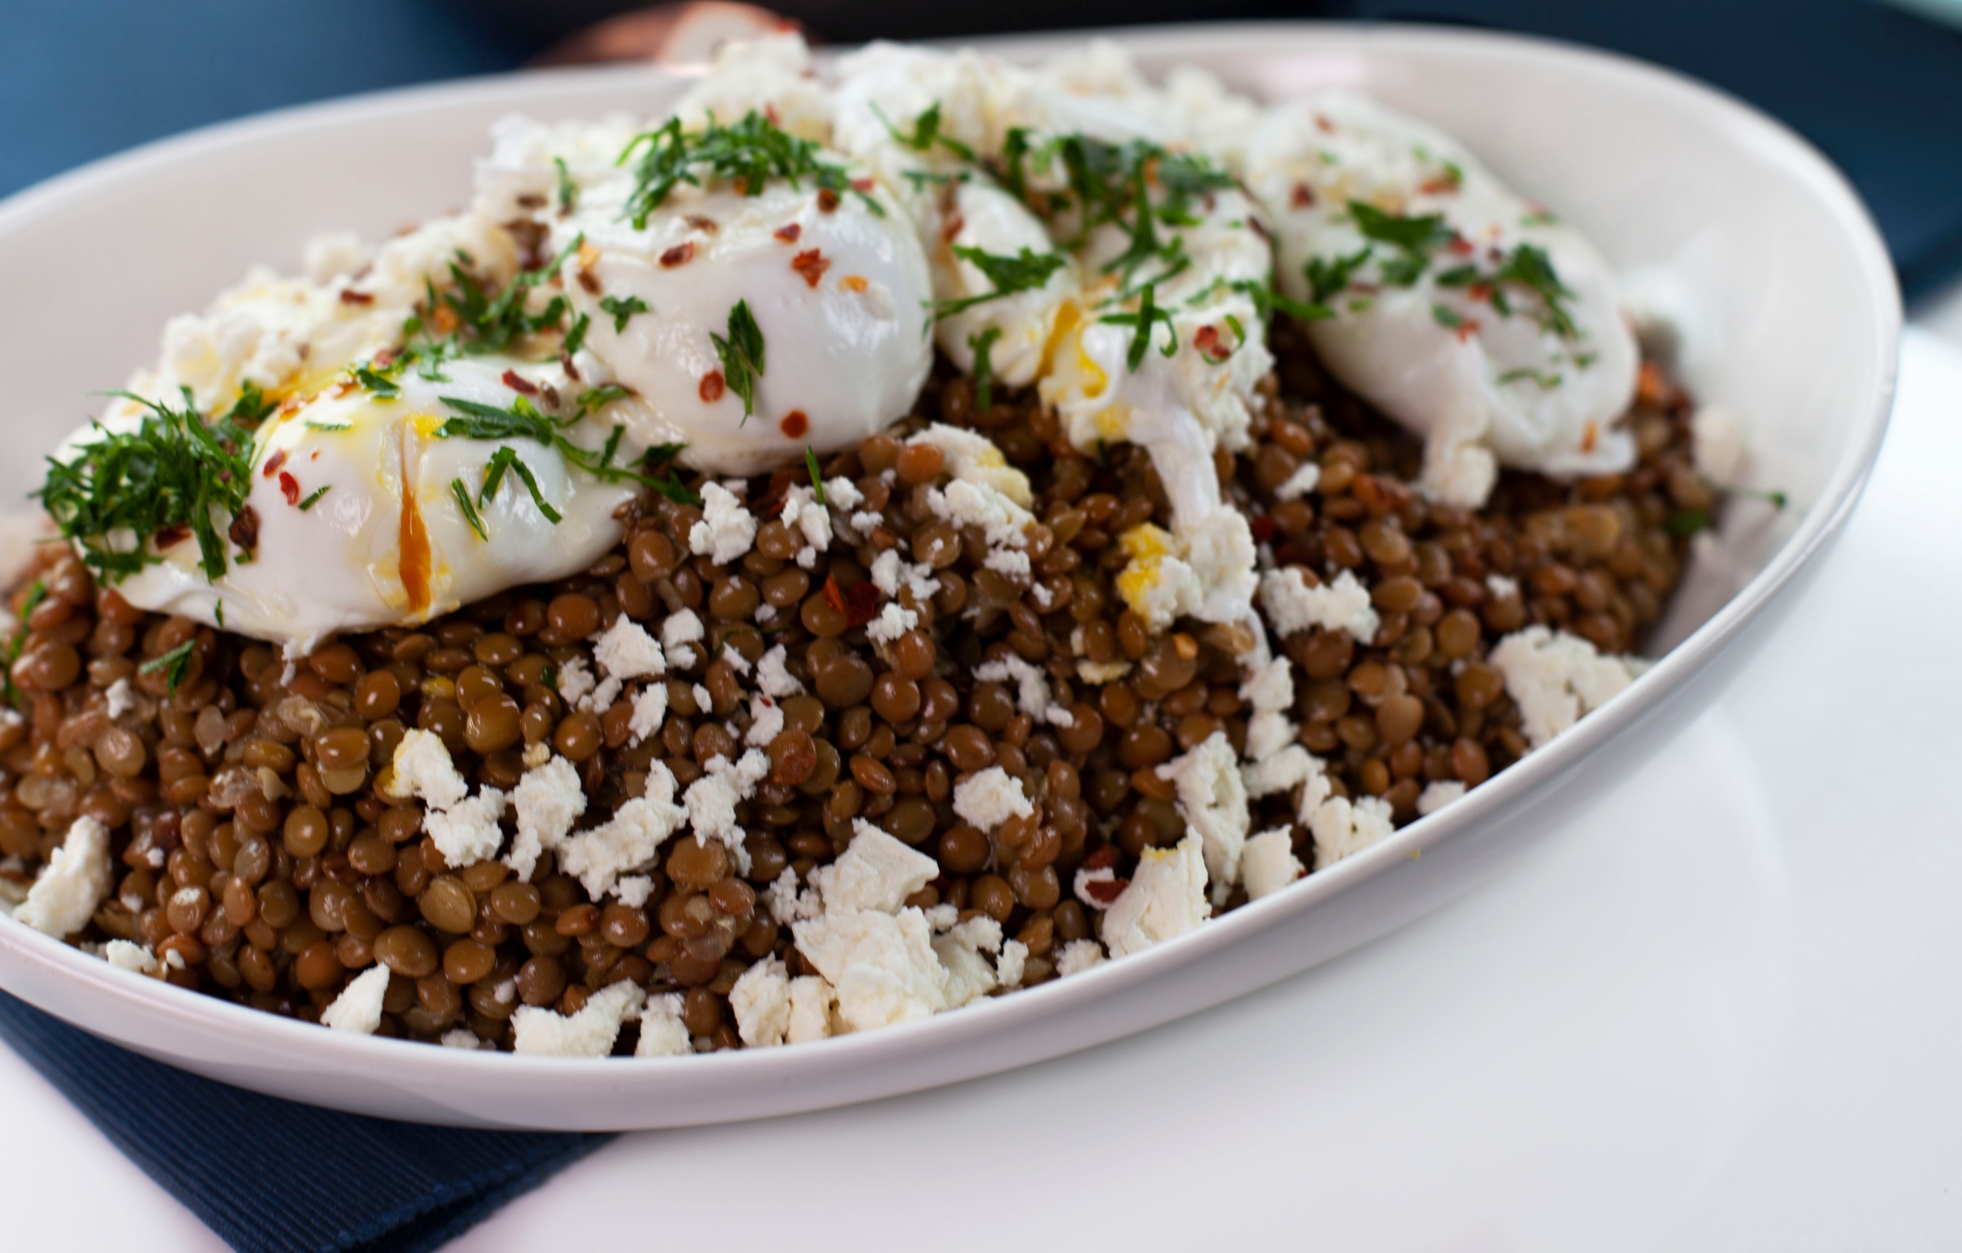 Warm lentils and poached egg